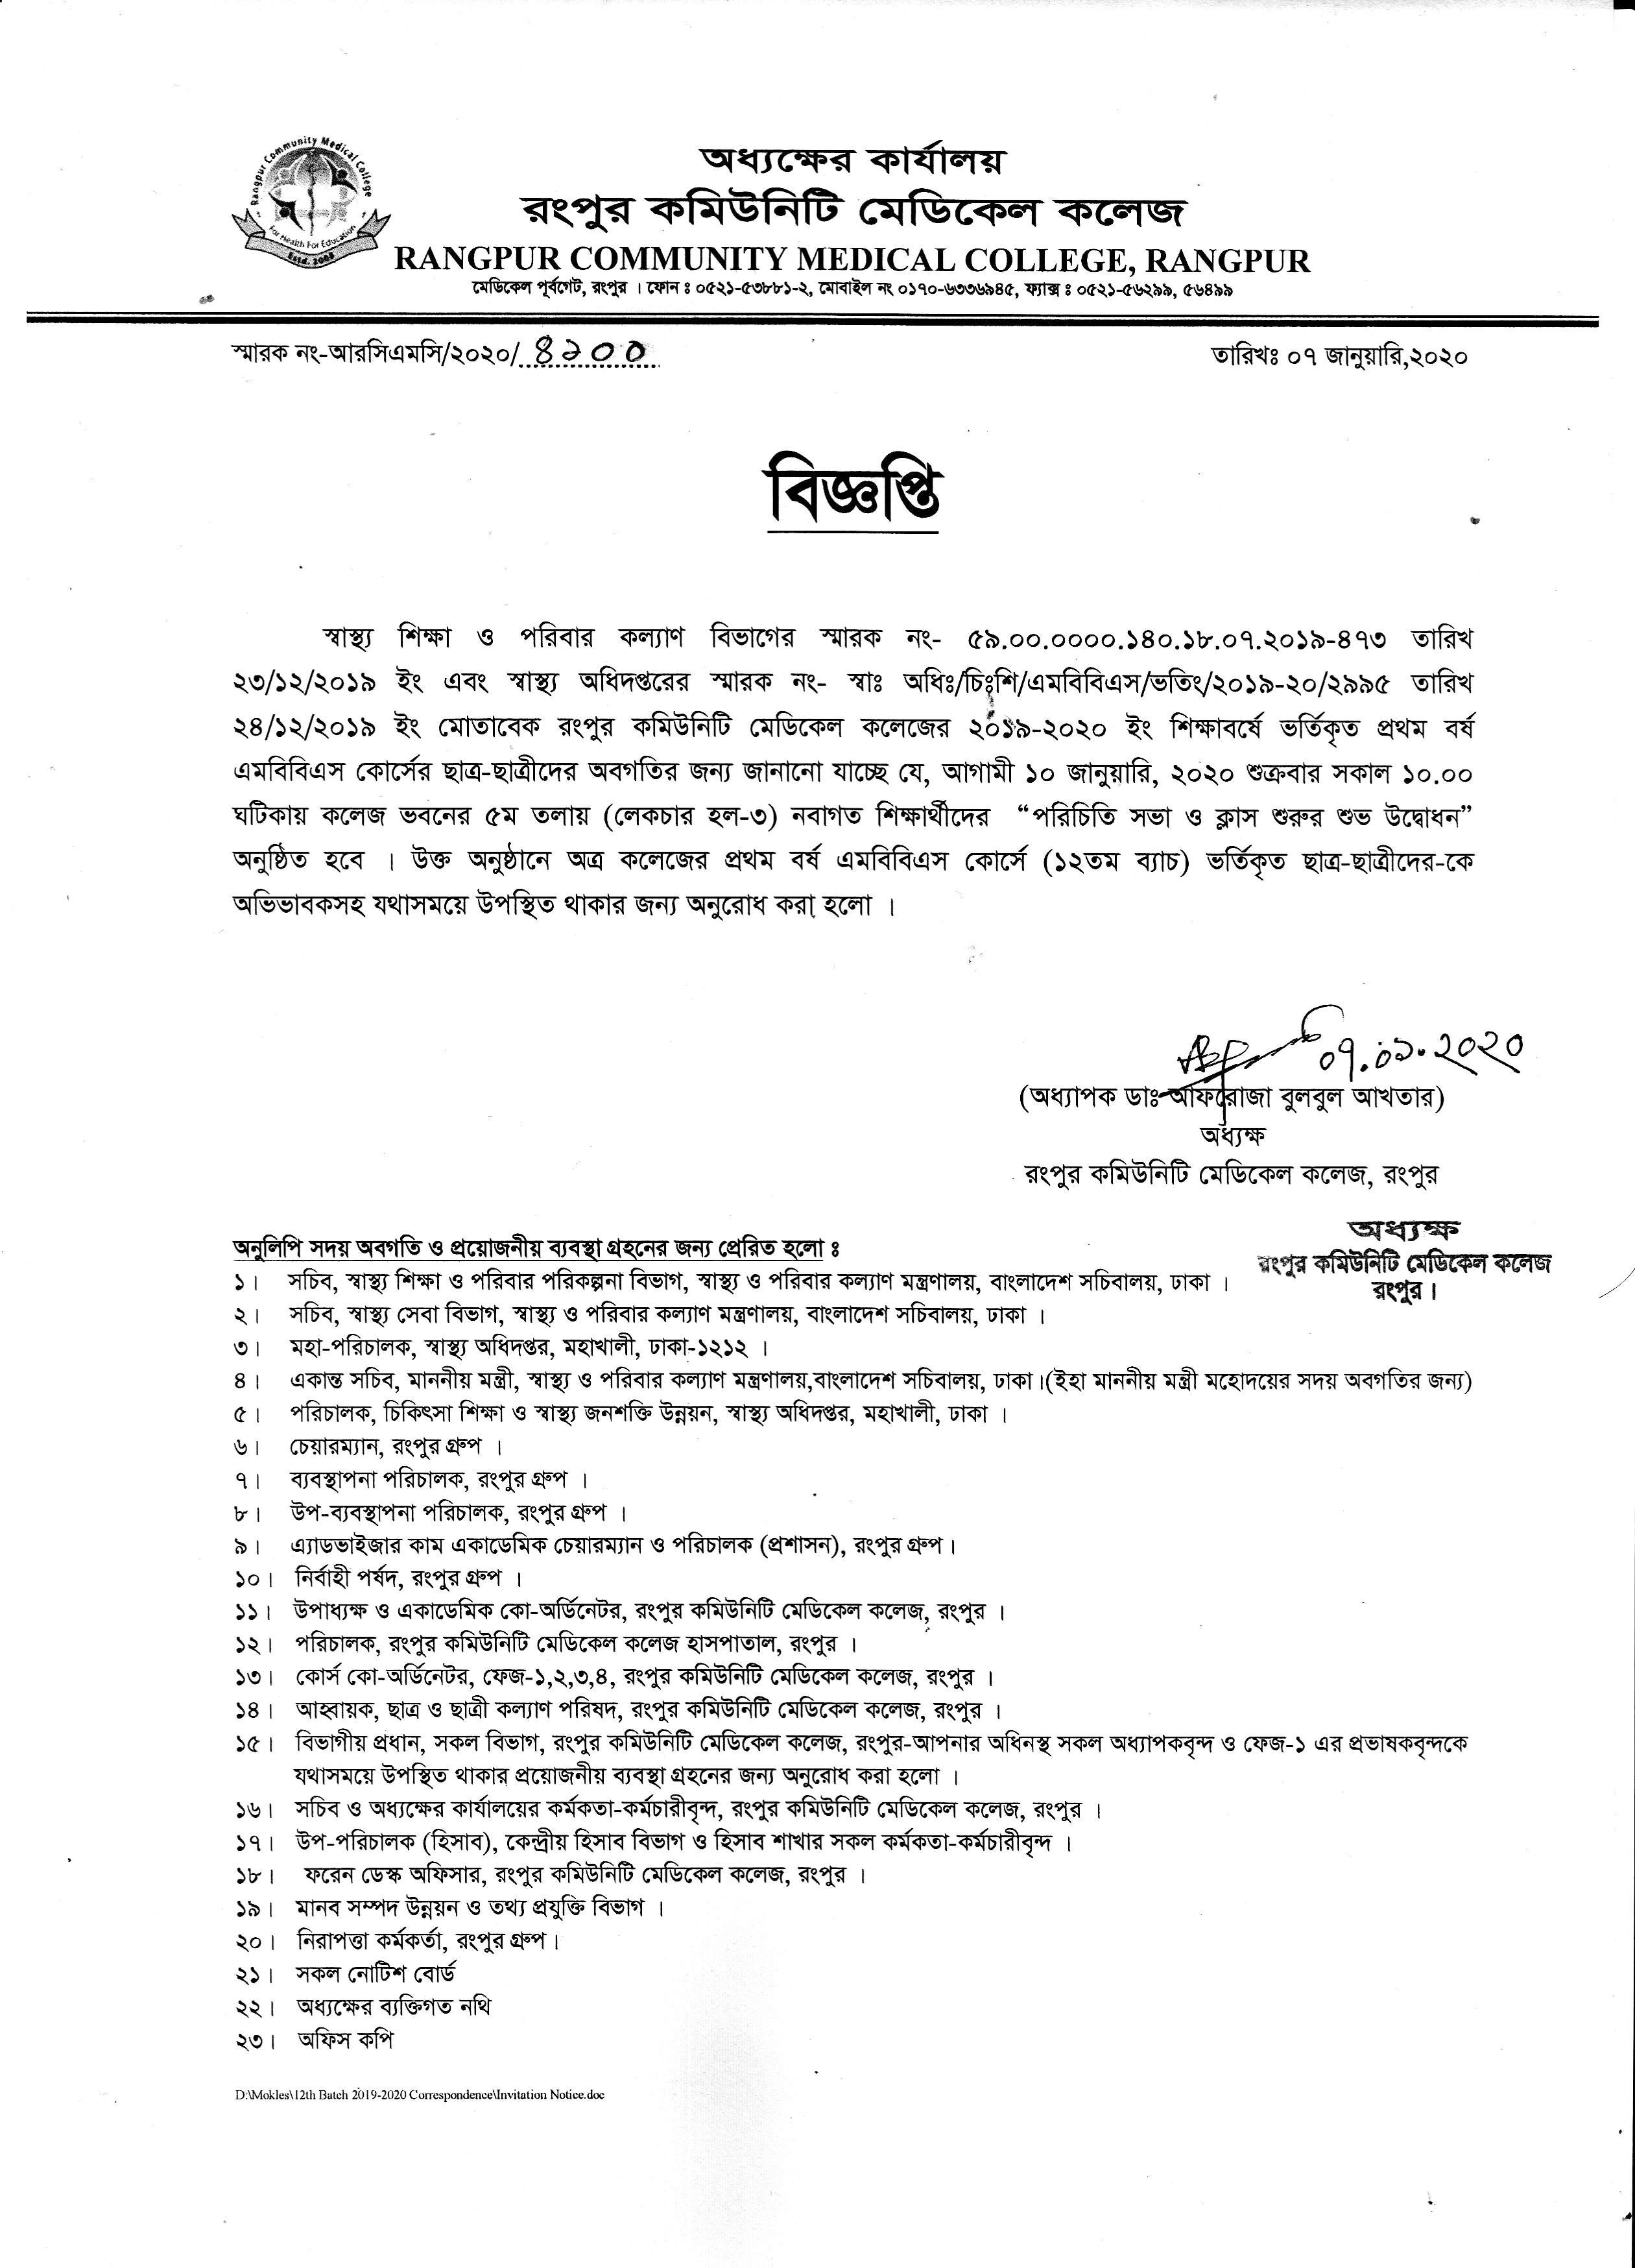 notice for the orientation program of rangpur community medical college (RCMC) for the academic year of 2019-2020